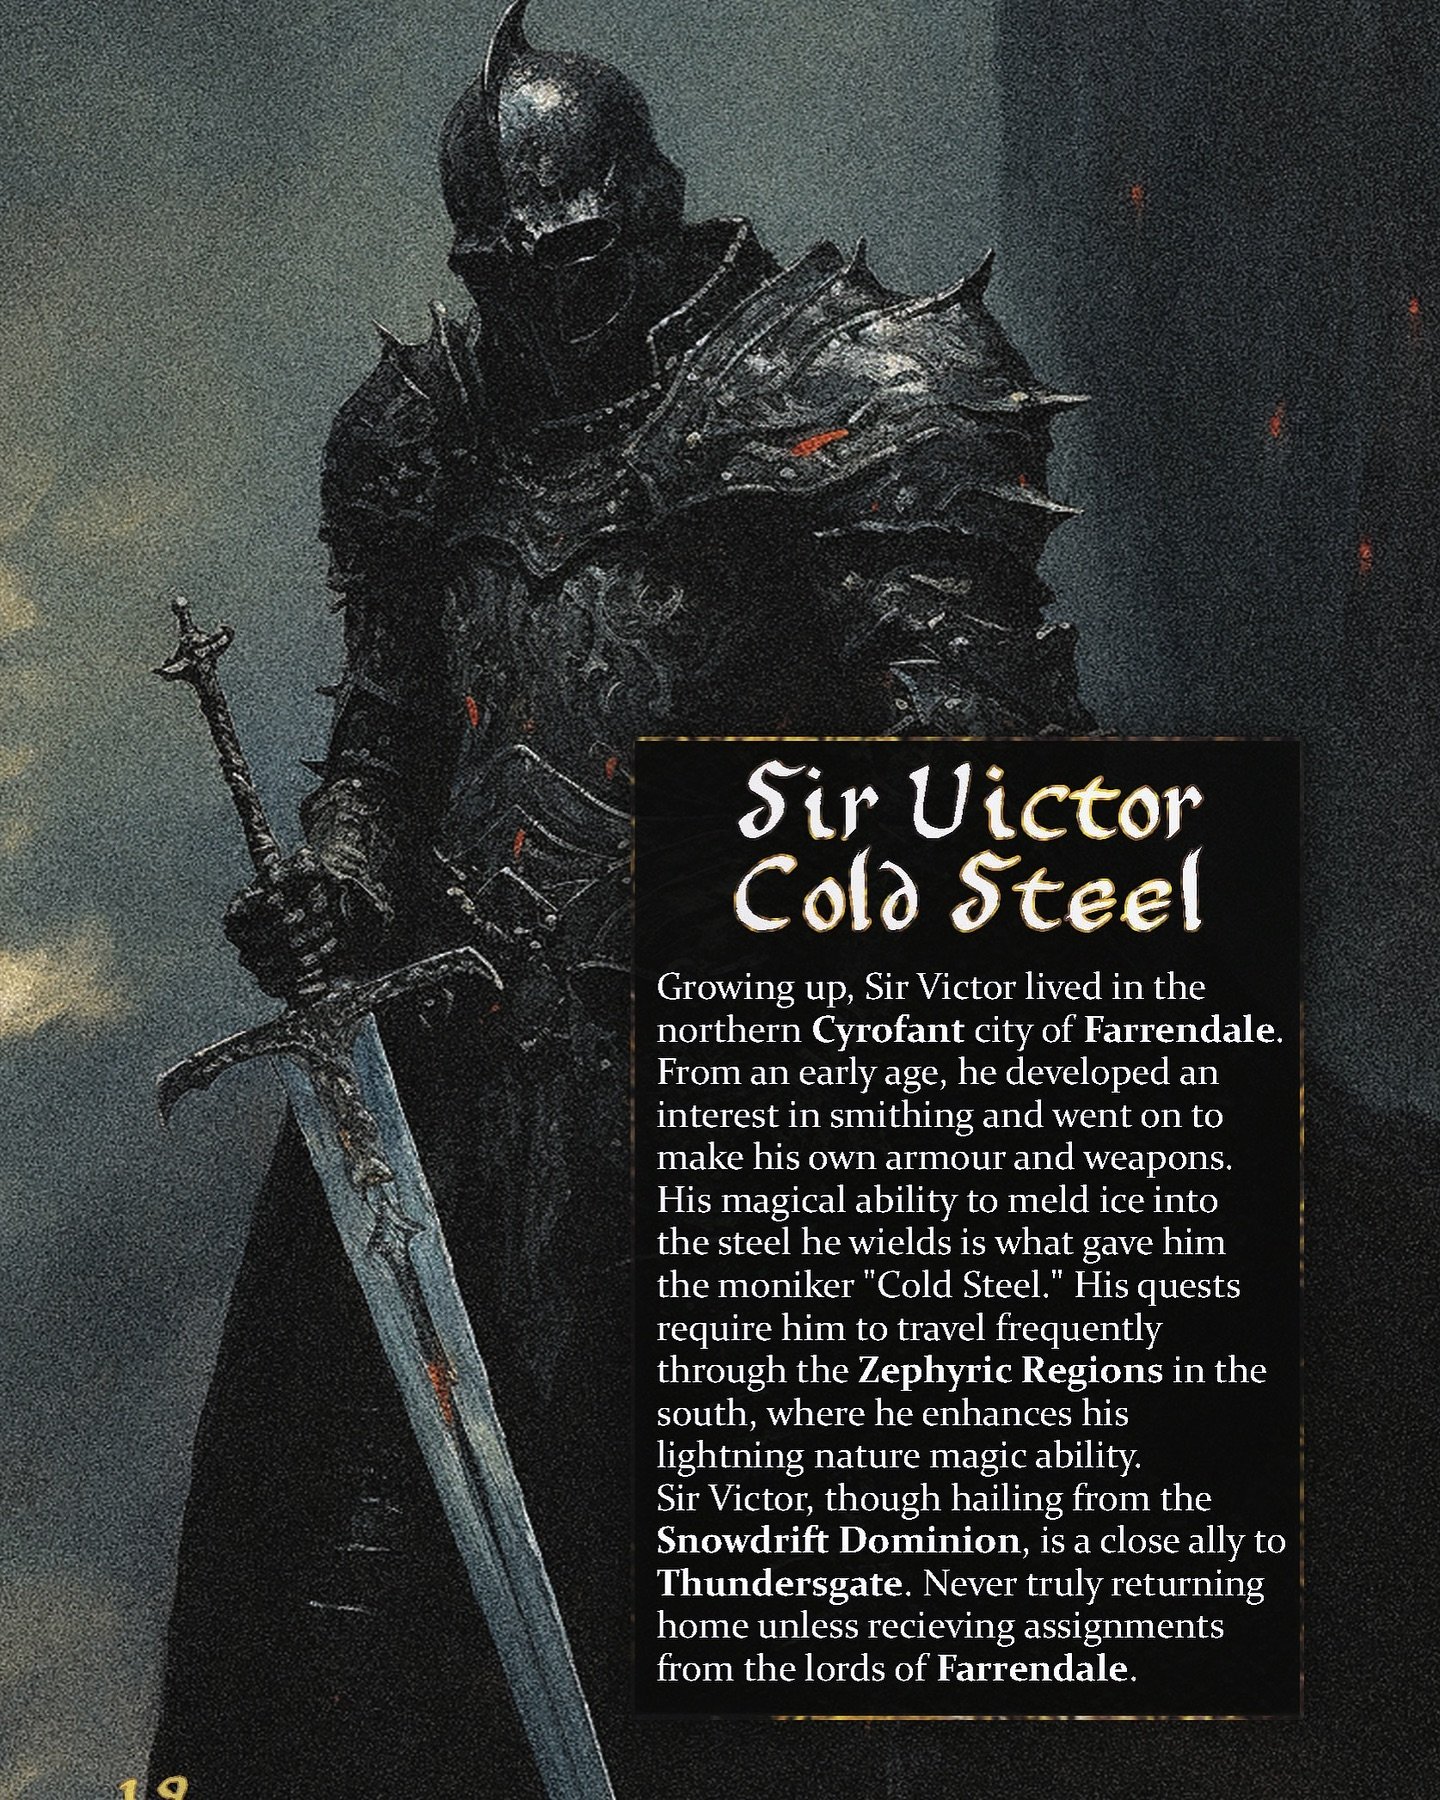 Sir Victor Cold Steel ⚔️❄️

Click the link in bio to learn more about the world of Gwyn! ❤️

𝕱𝖔𝖑𝖑𝖔𝖜 𝖙𝖔 𝖏𝖔𝖎𝖓 𝖙𝖍𝖊 𝖈𝖆𝖒𝖕𝖆𝖎𝖌𝖓🔮
@twilightcitadel ⬅️

🗡️: #dnd
🗡️: #darkart
🗡️: #darkfantasyart 
🗡️: #darkfantasy 
🗡️: #darkfantasya